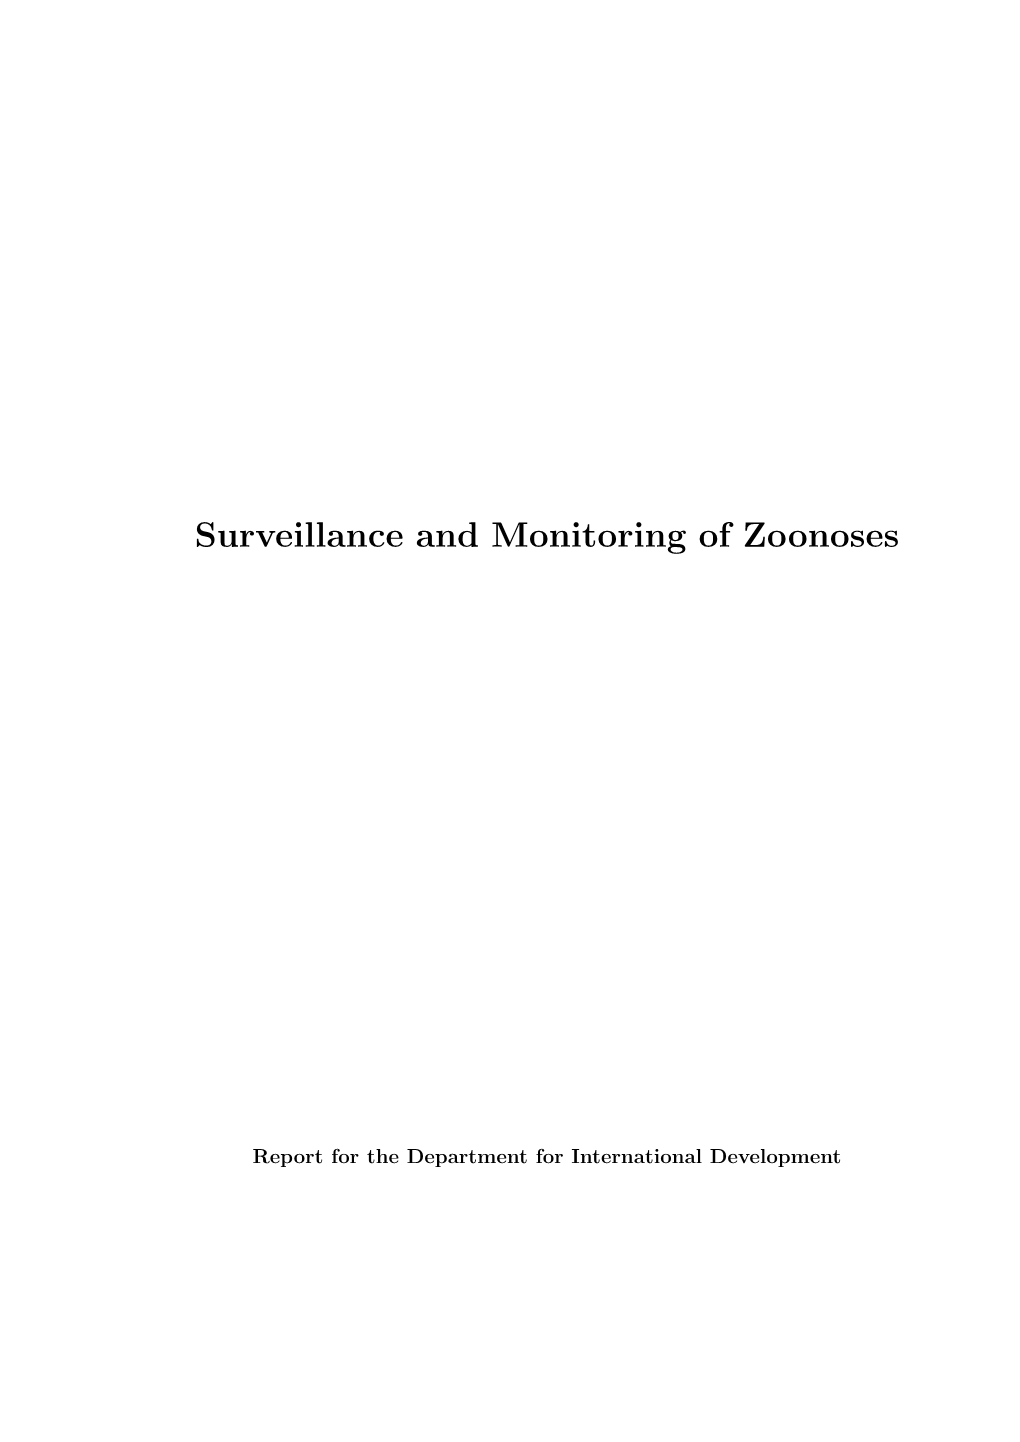 Surveillance and Monitoring of Zoonoses